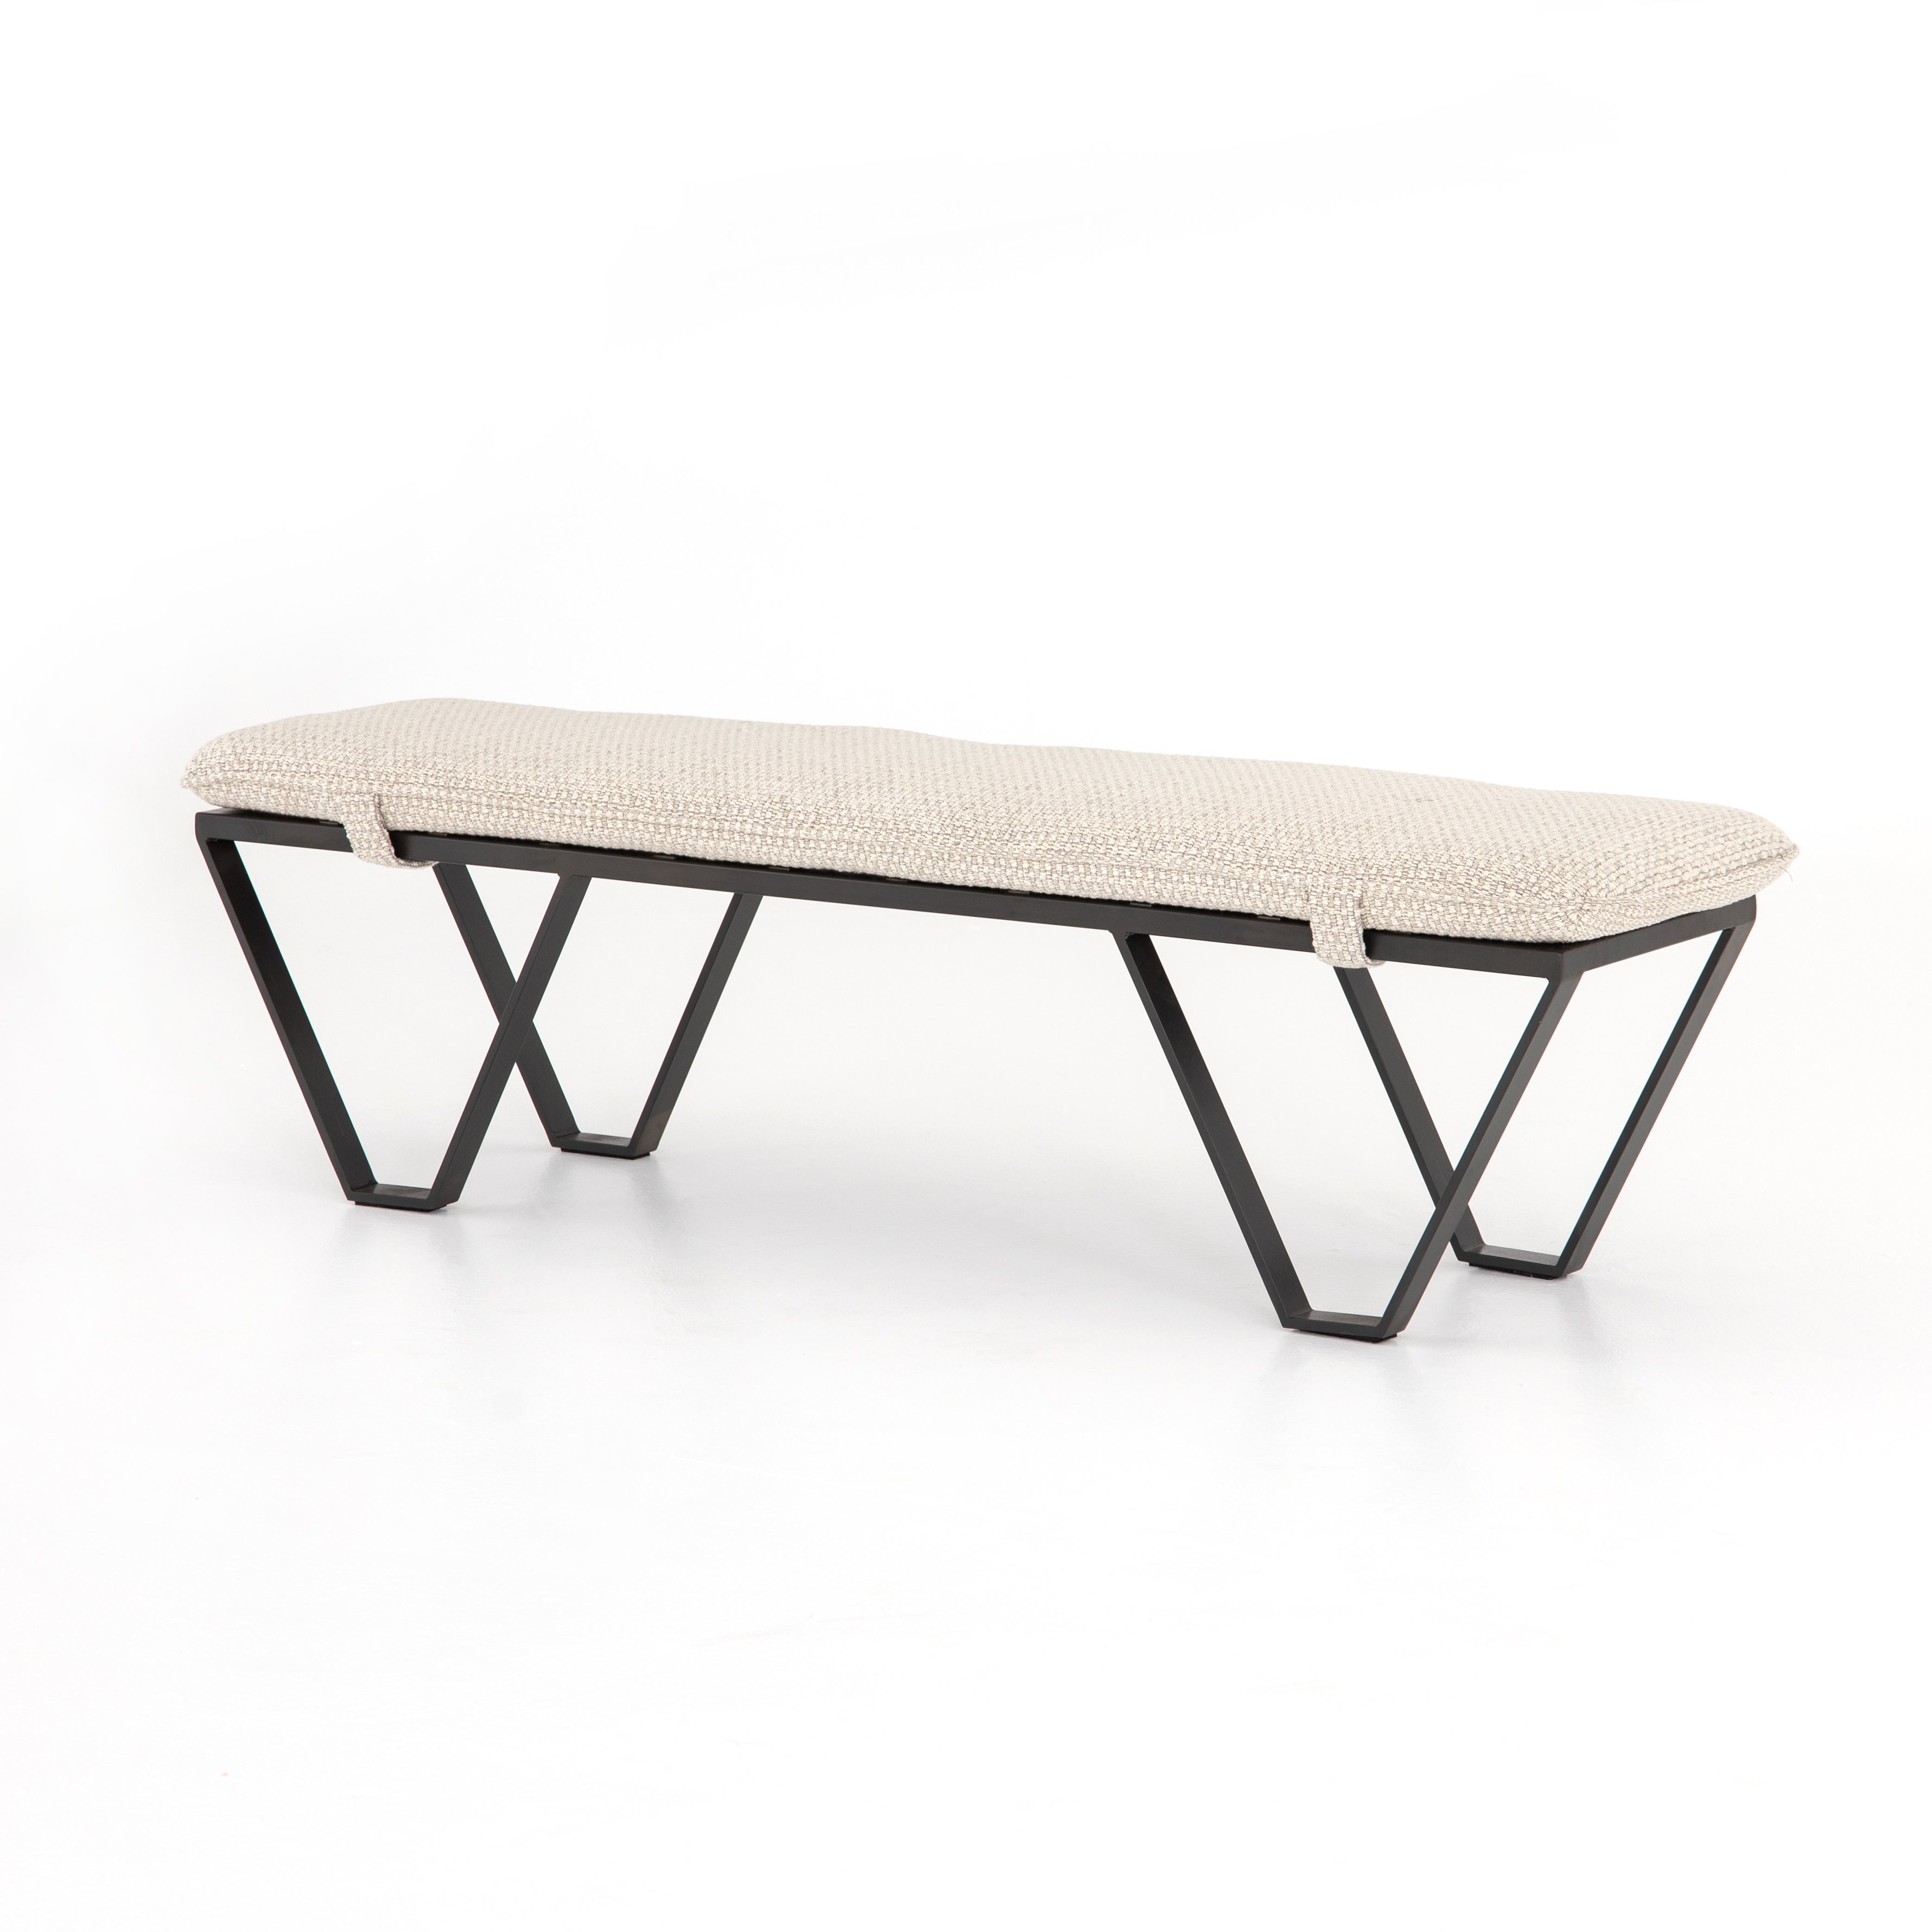 modern industrial padded cream fabric bench with metal base $899.00